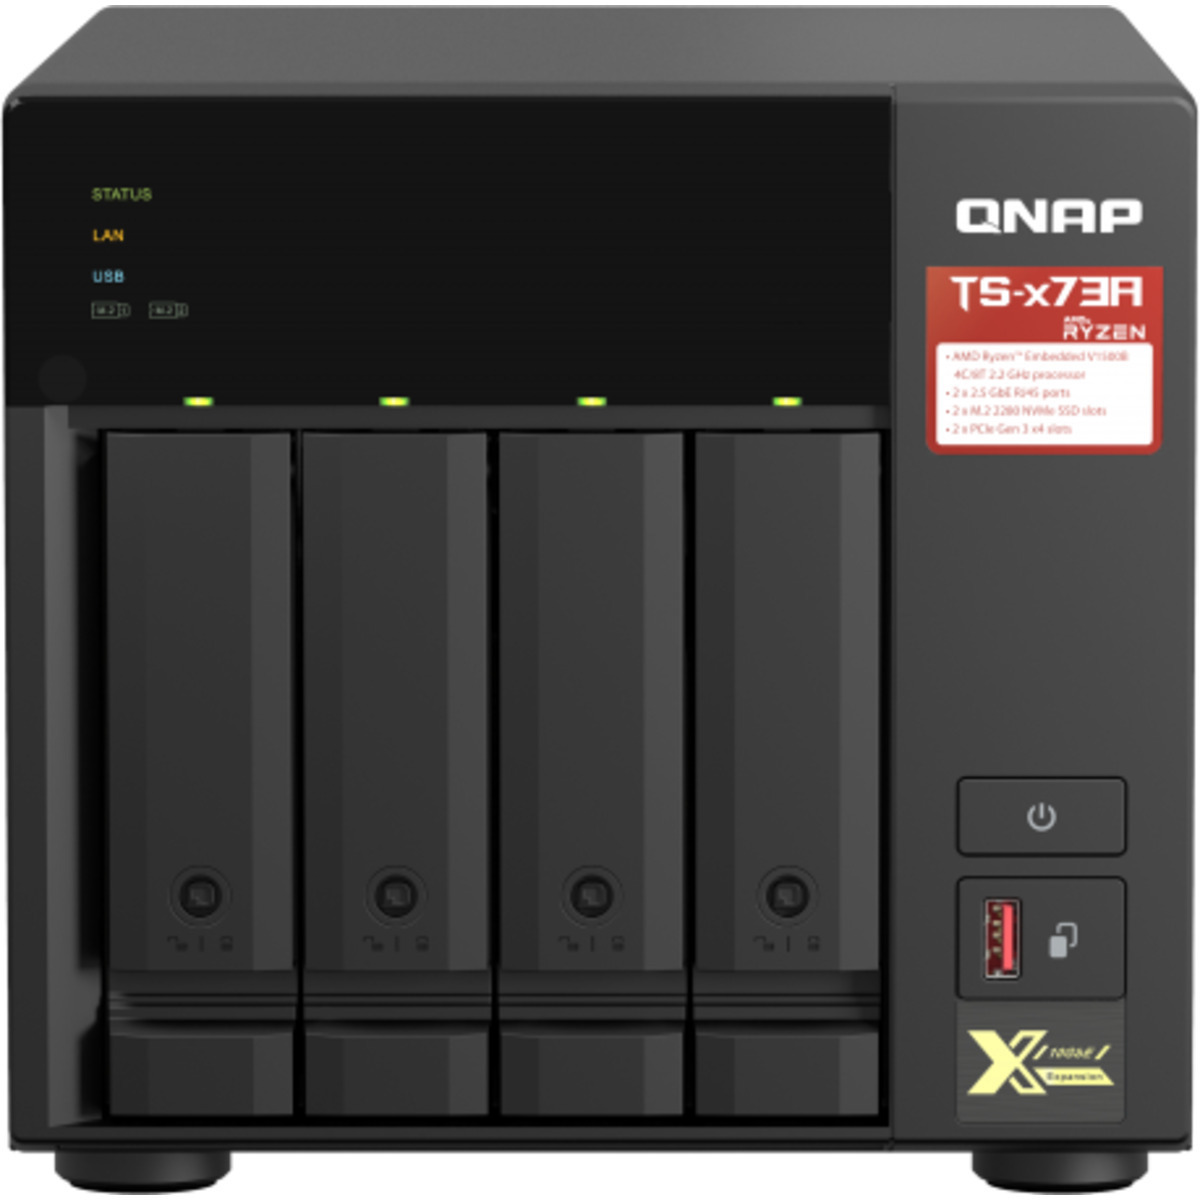 buy QNAP TS-473A 48tb Desktop NAS - Network Attached Storage Device 4x12000gb Seagate IronWolf Pro ST12000NT001 3.5 7200rpm SATA 6Gb/s HDD NAS Class Drives Installed - Burn-In Tested - ON SALE - nas headquarters buy network attached storage server device das new raid-5 free shipping simply usa christmas holiday black friday cyber monday week sale happening now! TS-473A